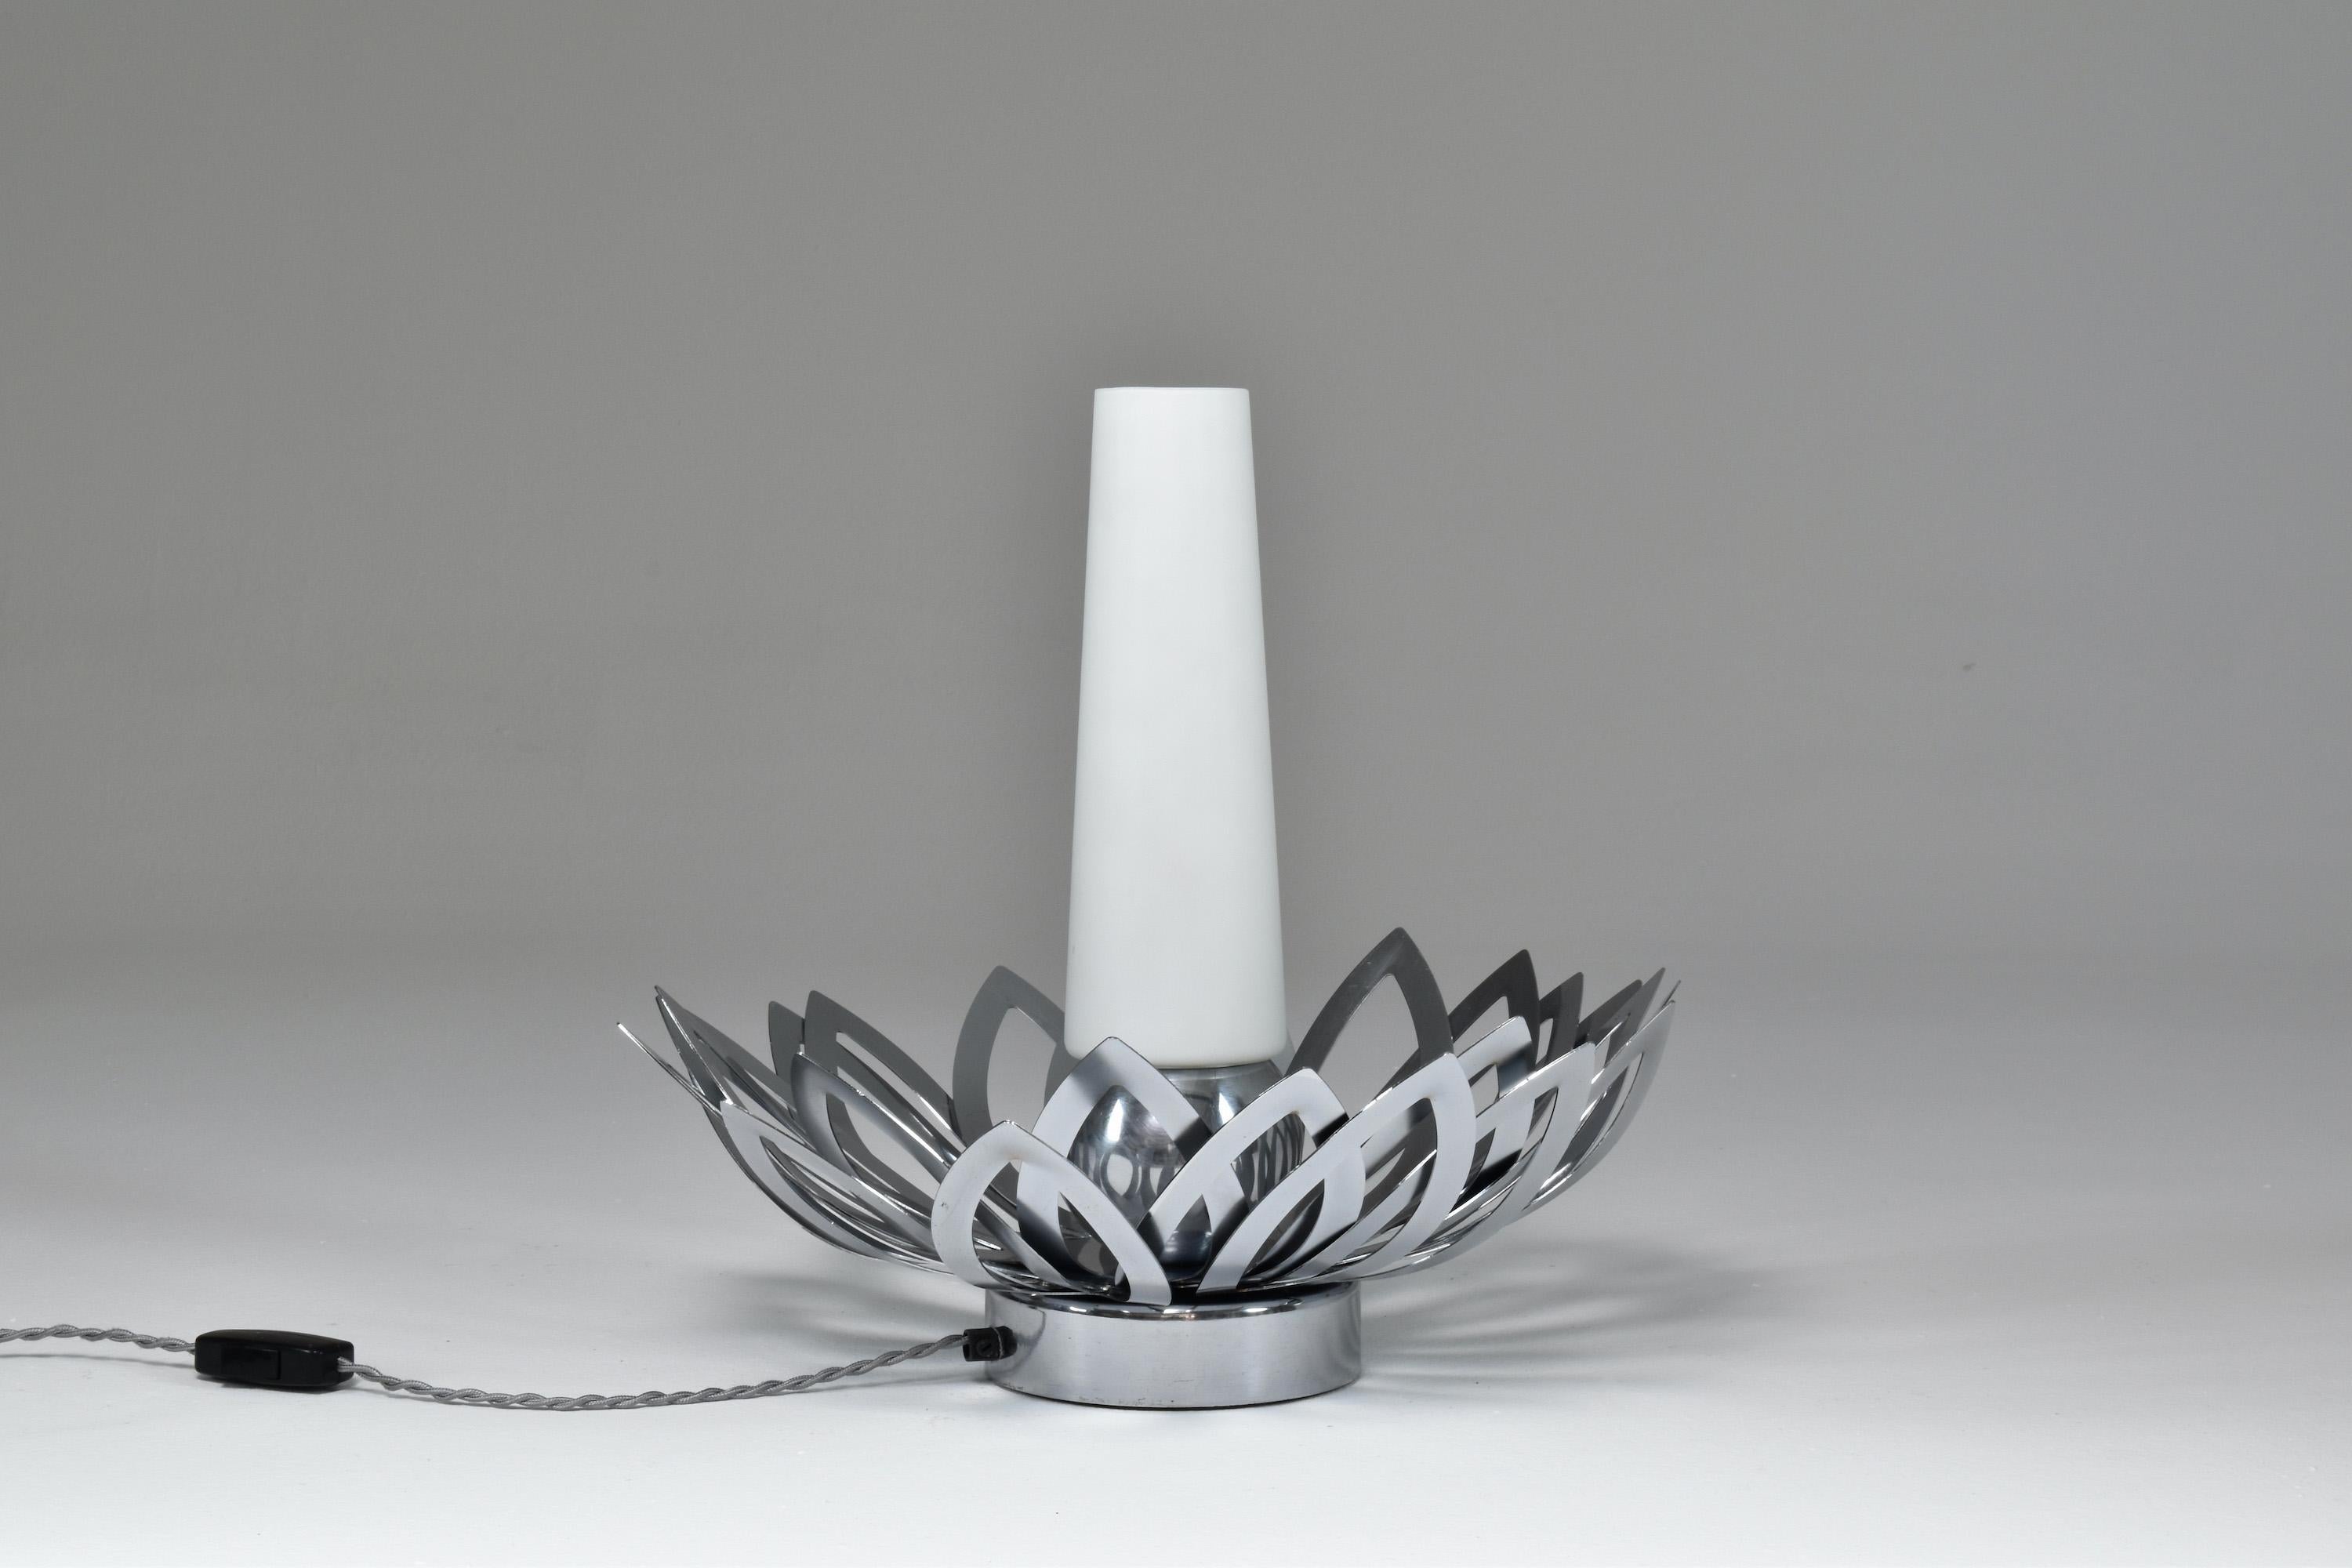 A highly original vintage statement table lamp designed and crafted by French artist Jacqueline Trocmé in the 1970s. The light resembling a flower is designed with beautiful leaves all around and a soft central opaline white glass shade in the